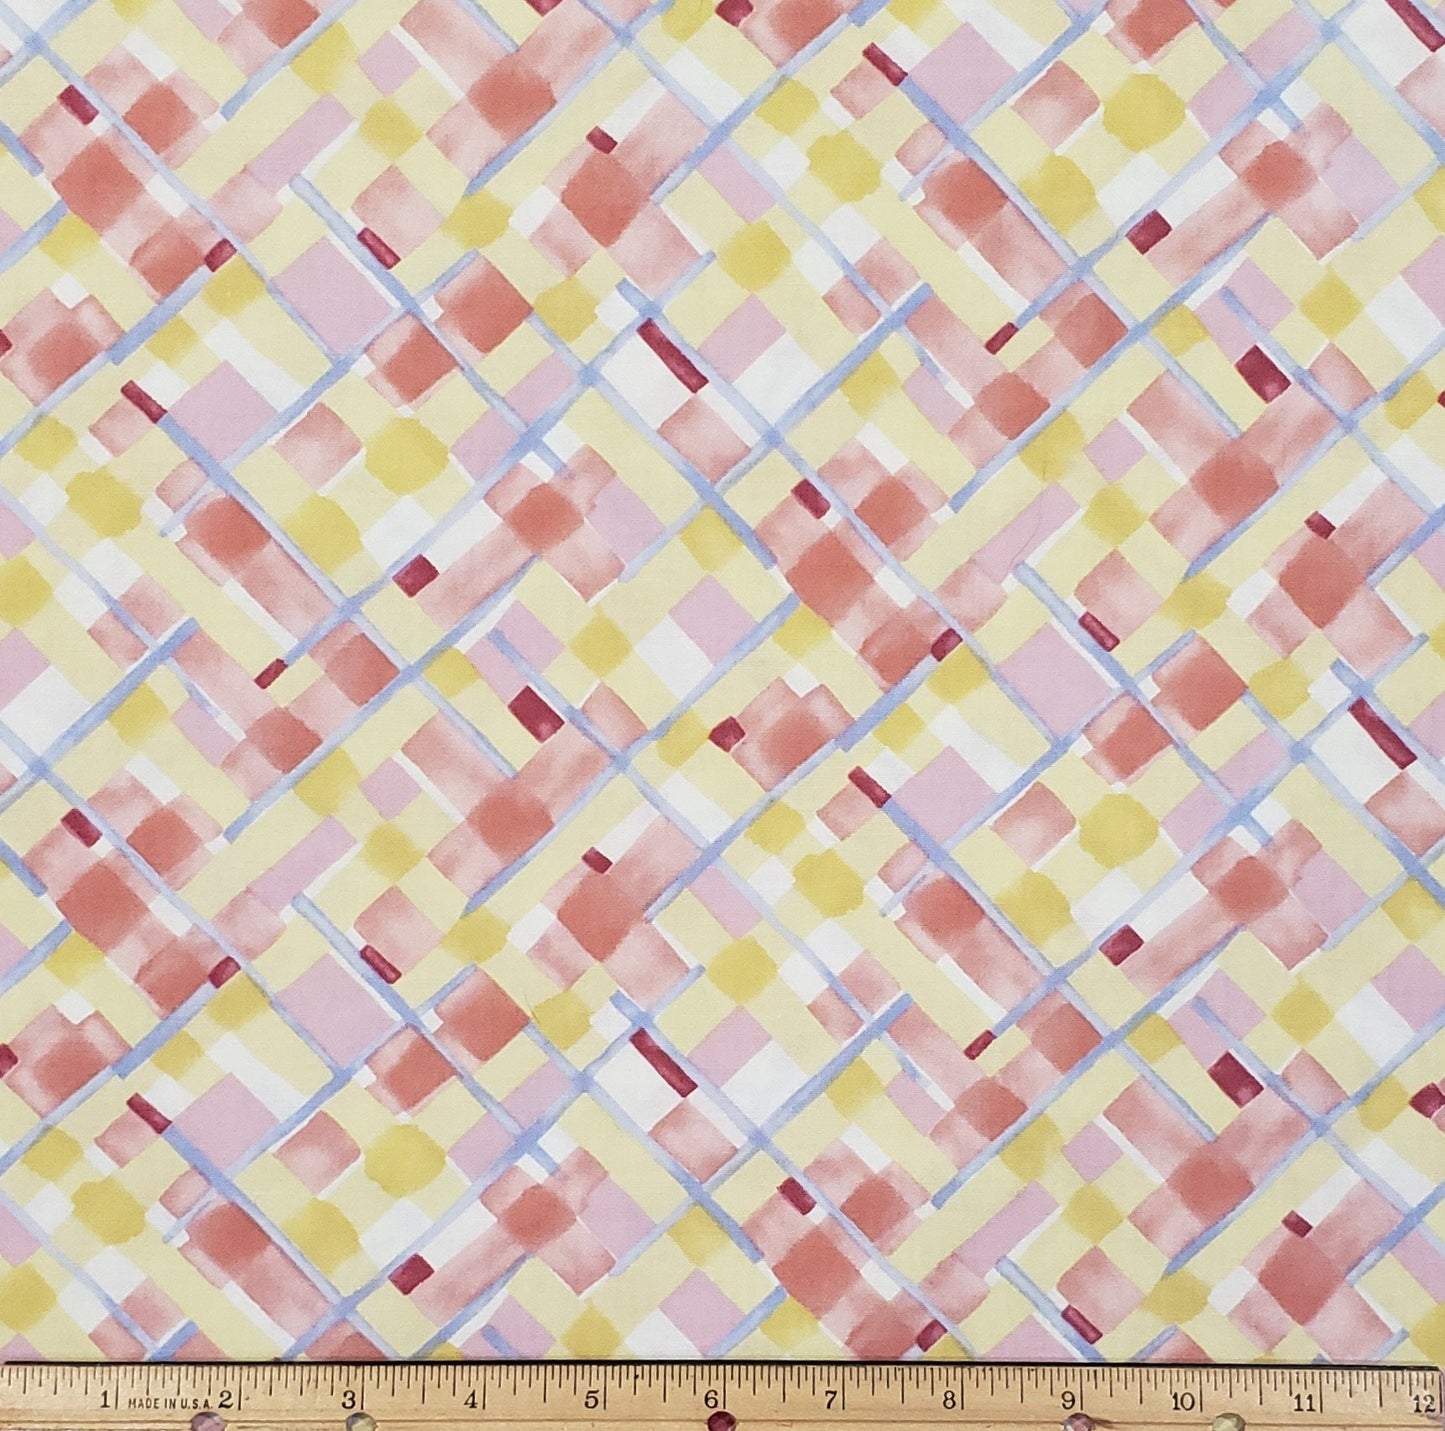 Flora by Moda - Geometric Print Fabric with Shades of Pink, Blue and Yellow